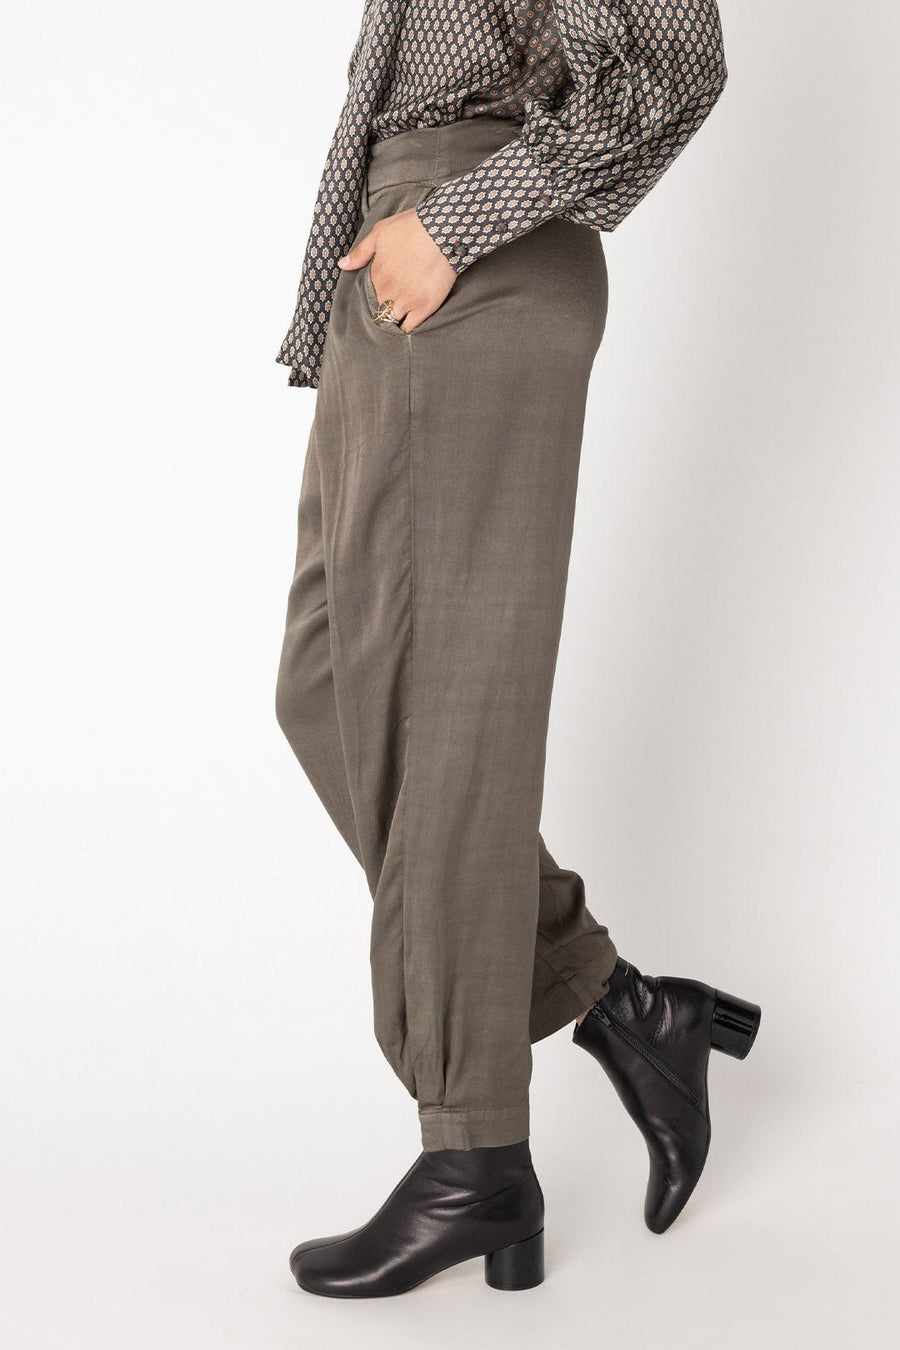 HANOVER TAPERED TROUSER, ARMY - Burning Torch Online Boutique